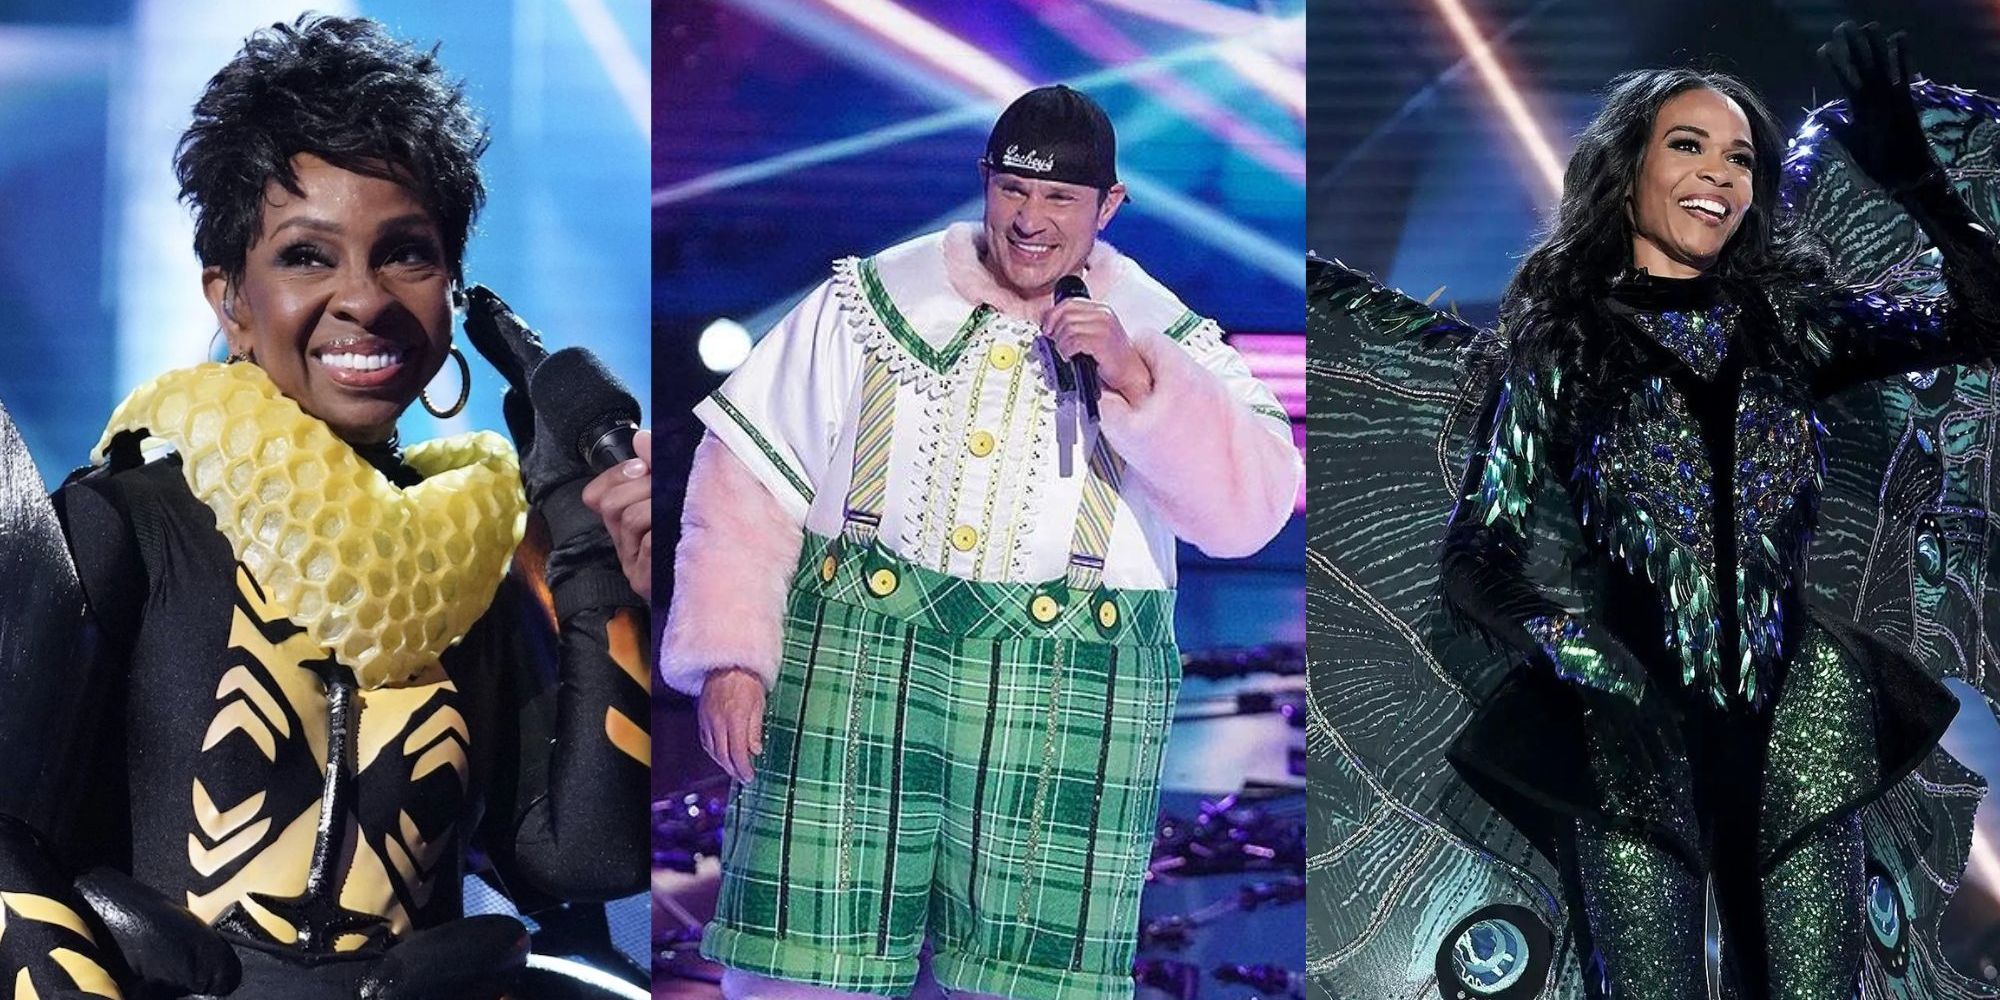 The Masked Singer Unmasked Celebrities three side by side images